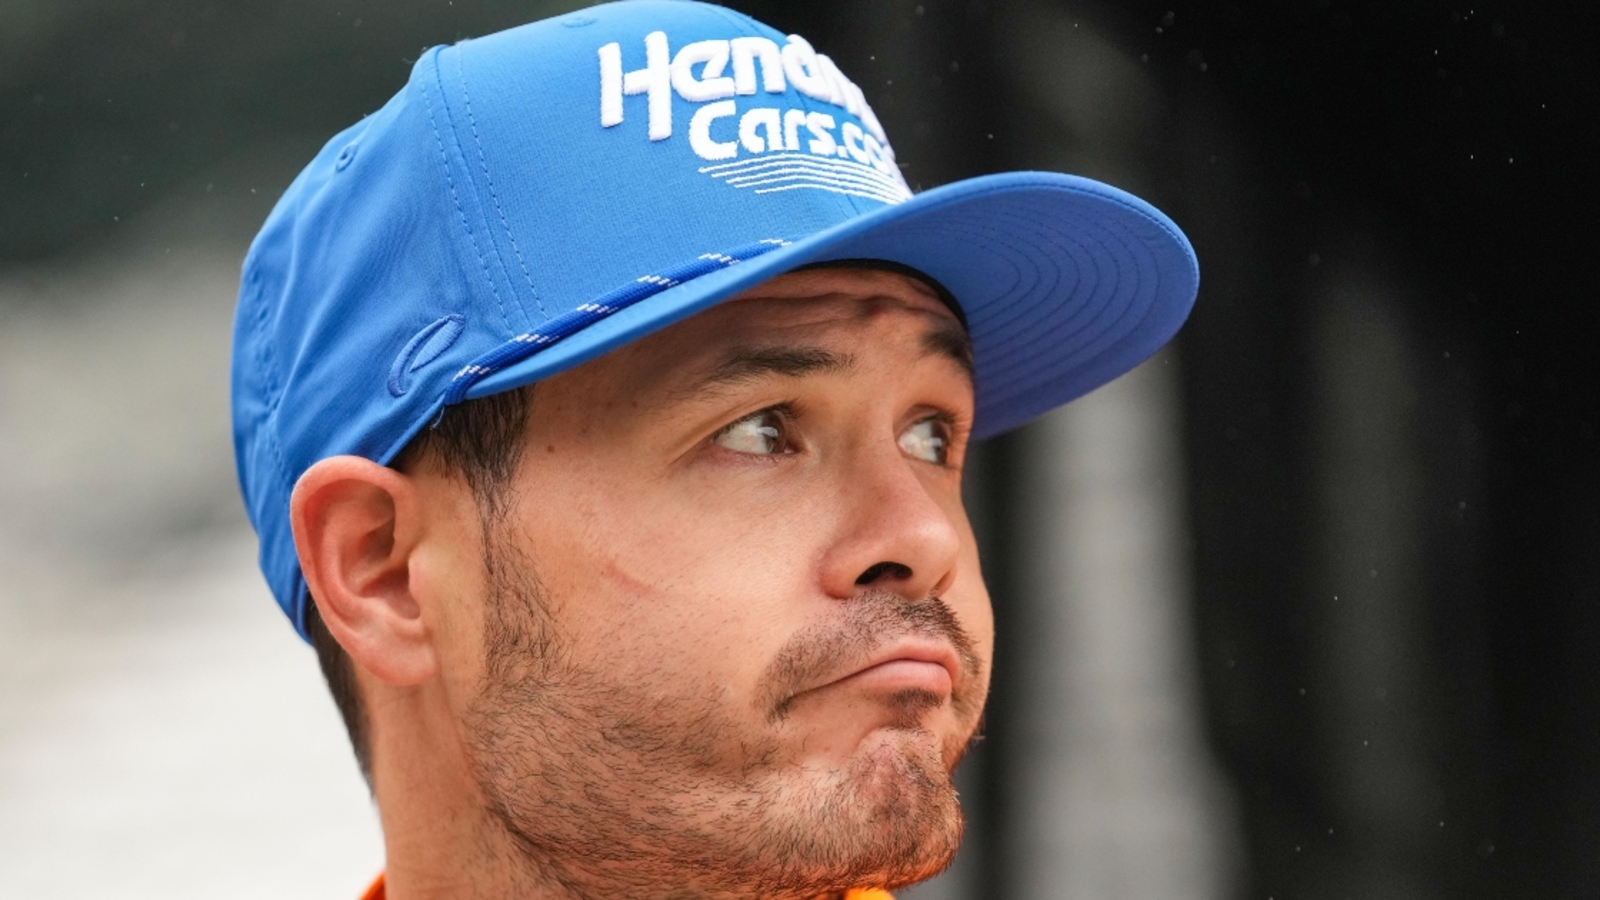 Kyle Larson misses valuable track time during ‘boring and frustrating’ day of Indy 500 practice